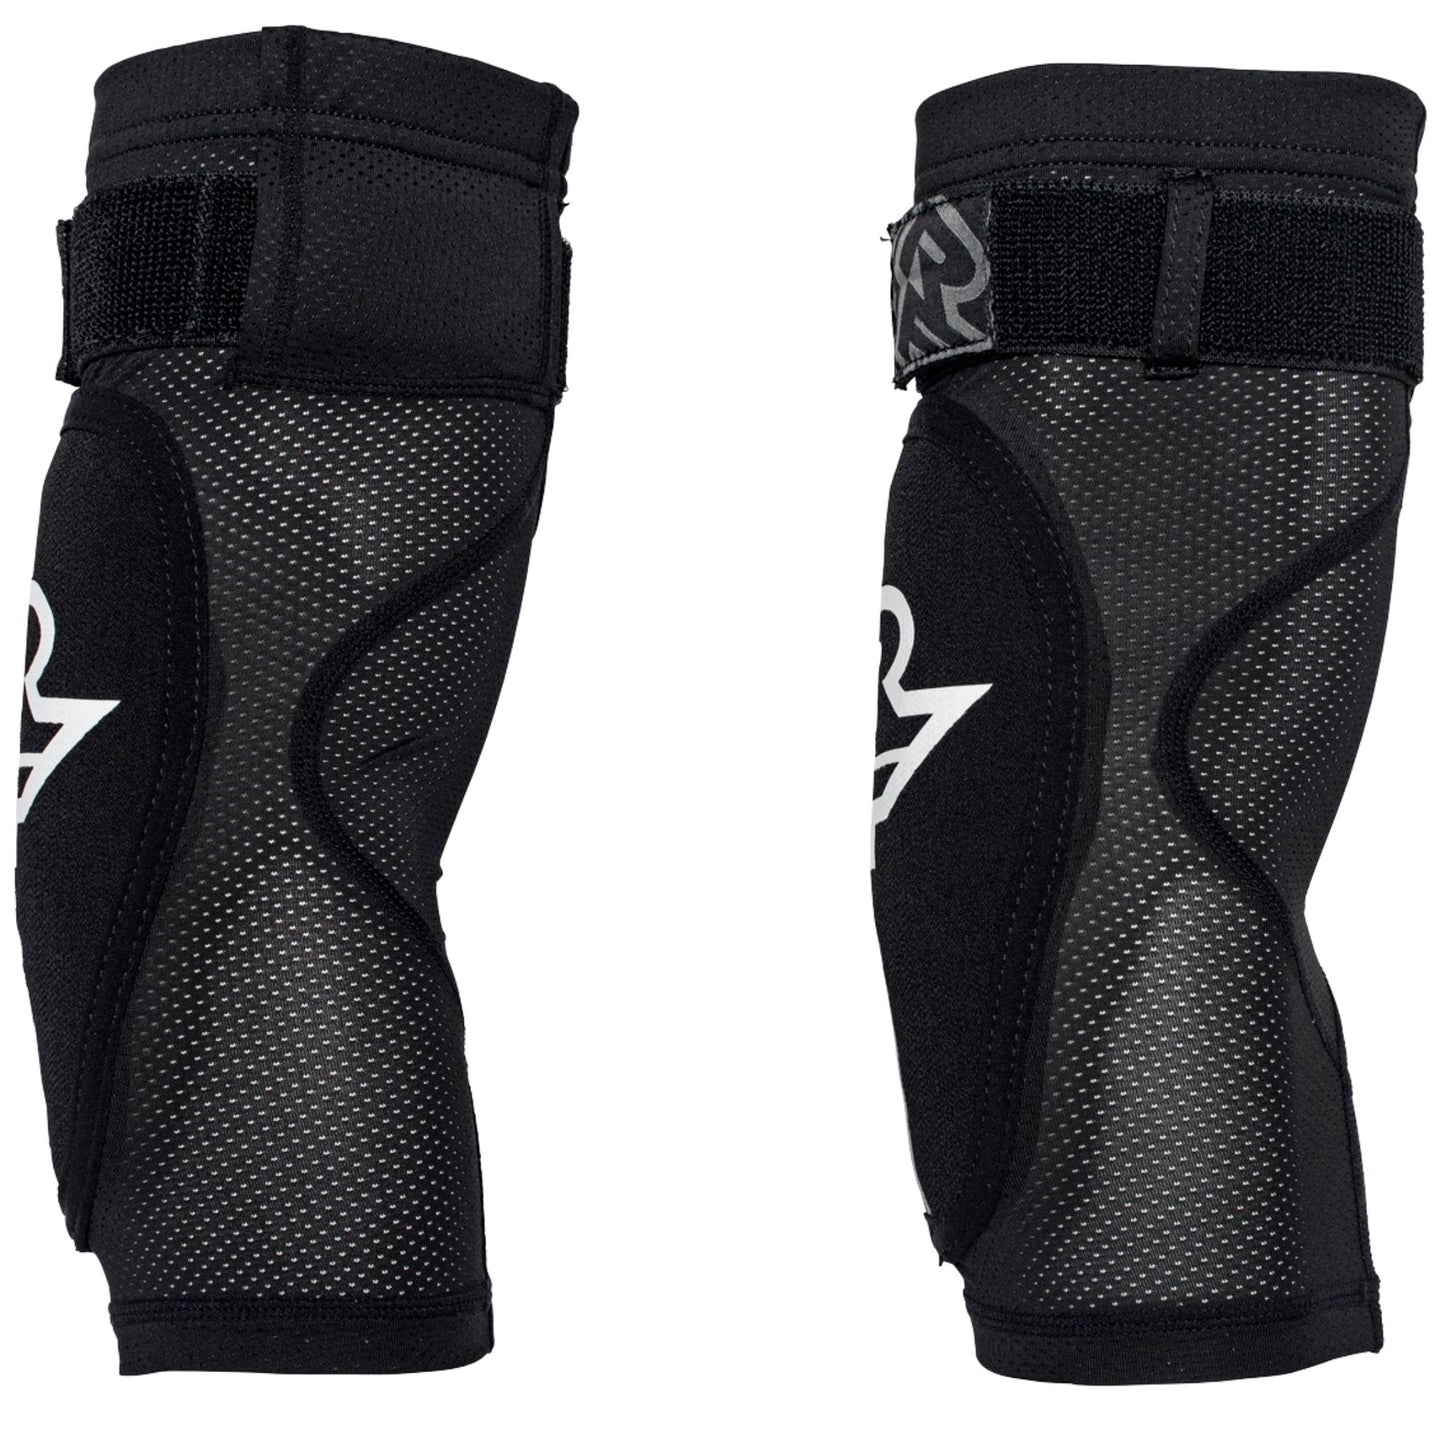 Race Face Indy Elbow Guard 2021